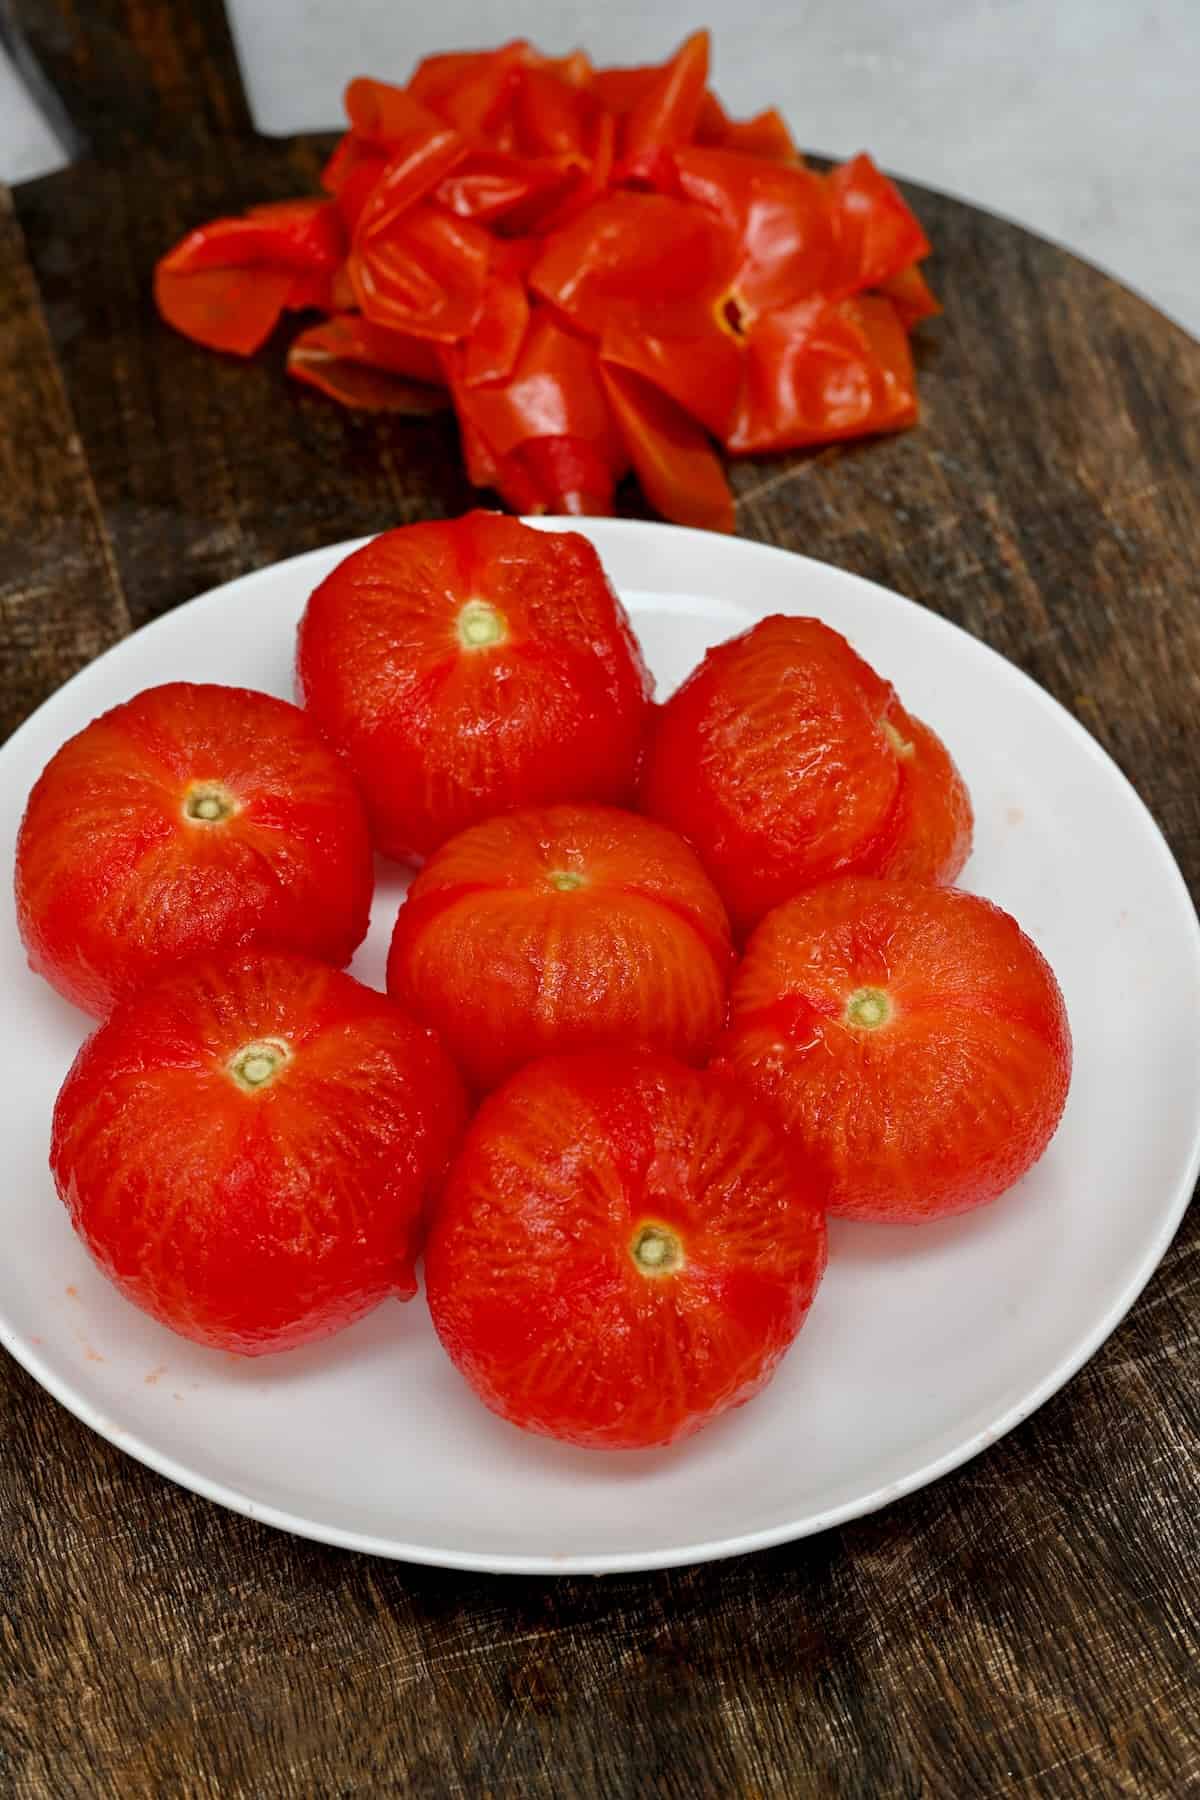 Peeled tomatoes and discarded tomato skin